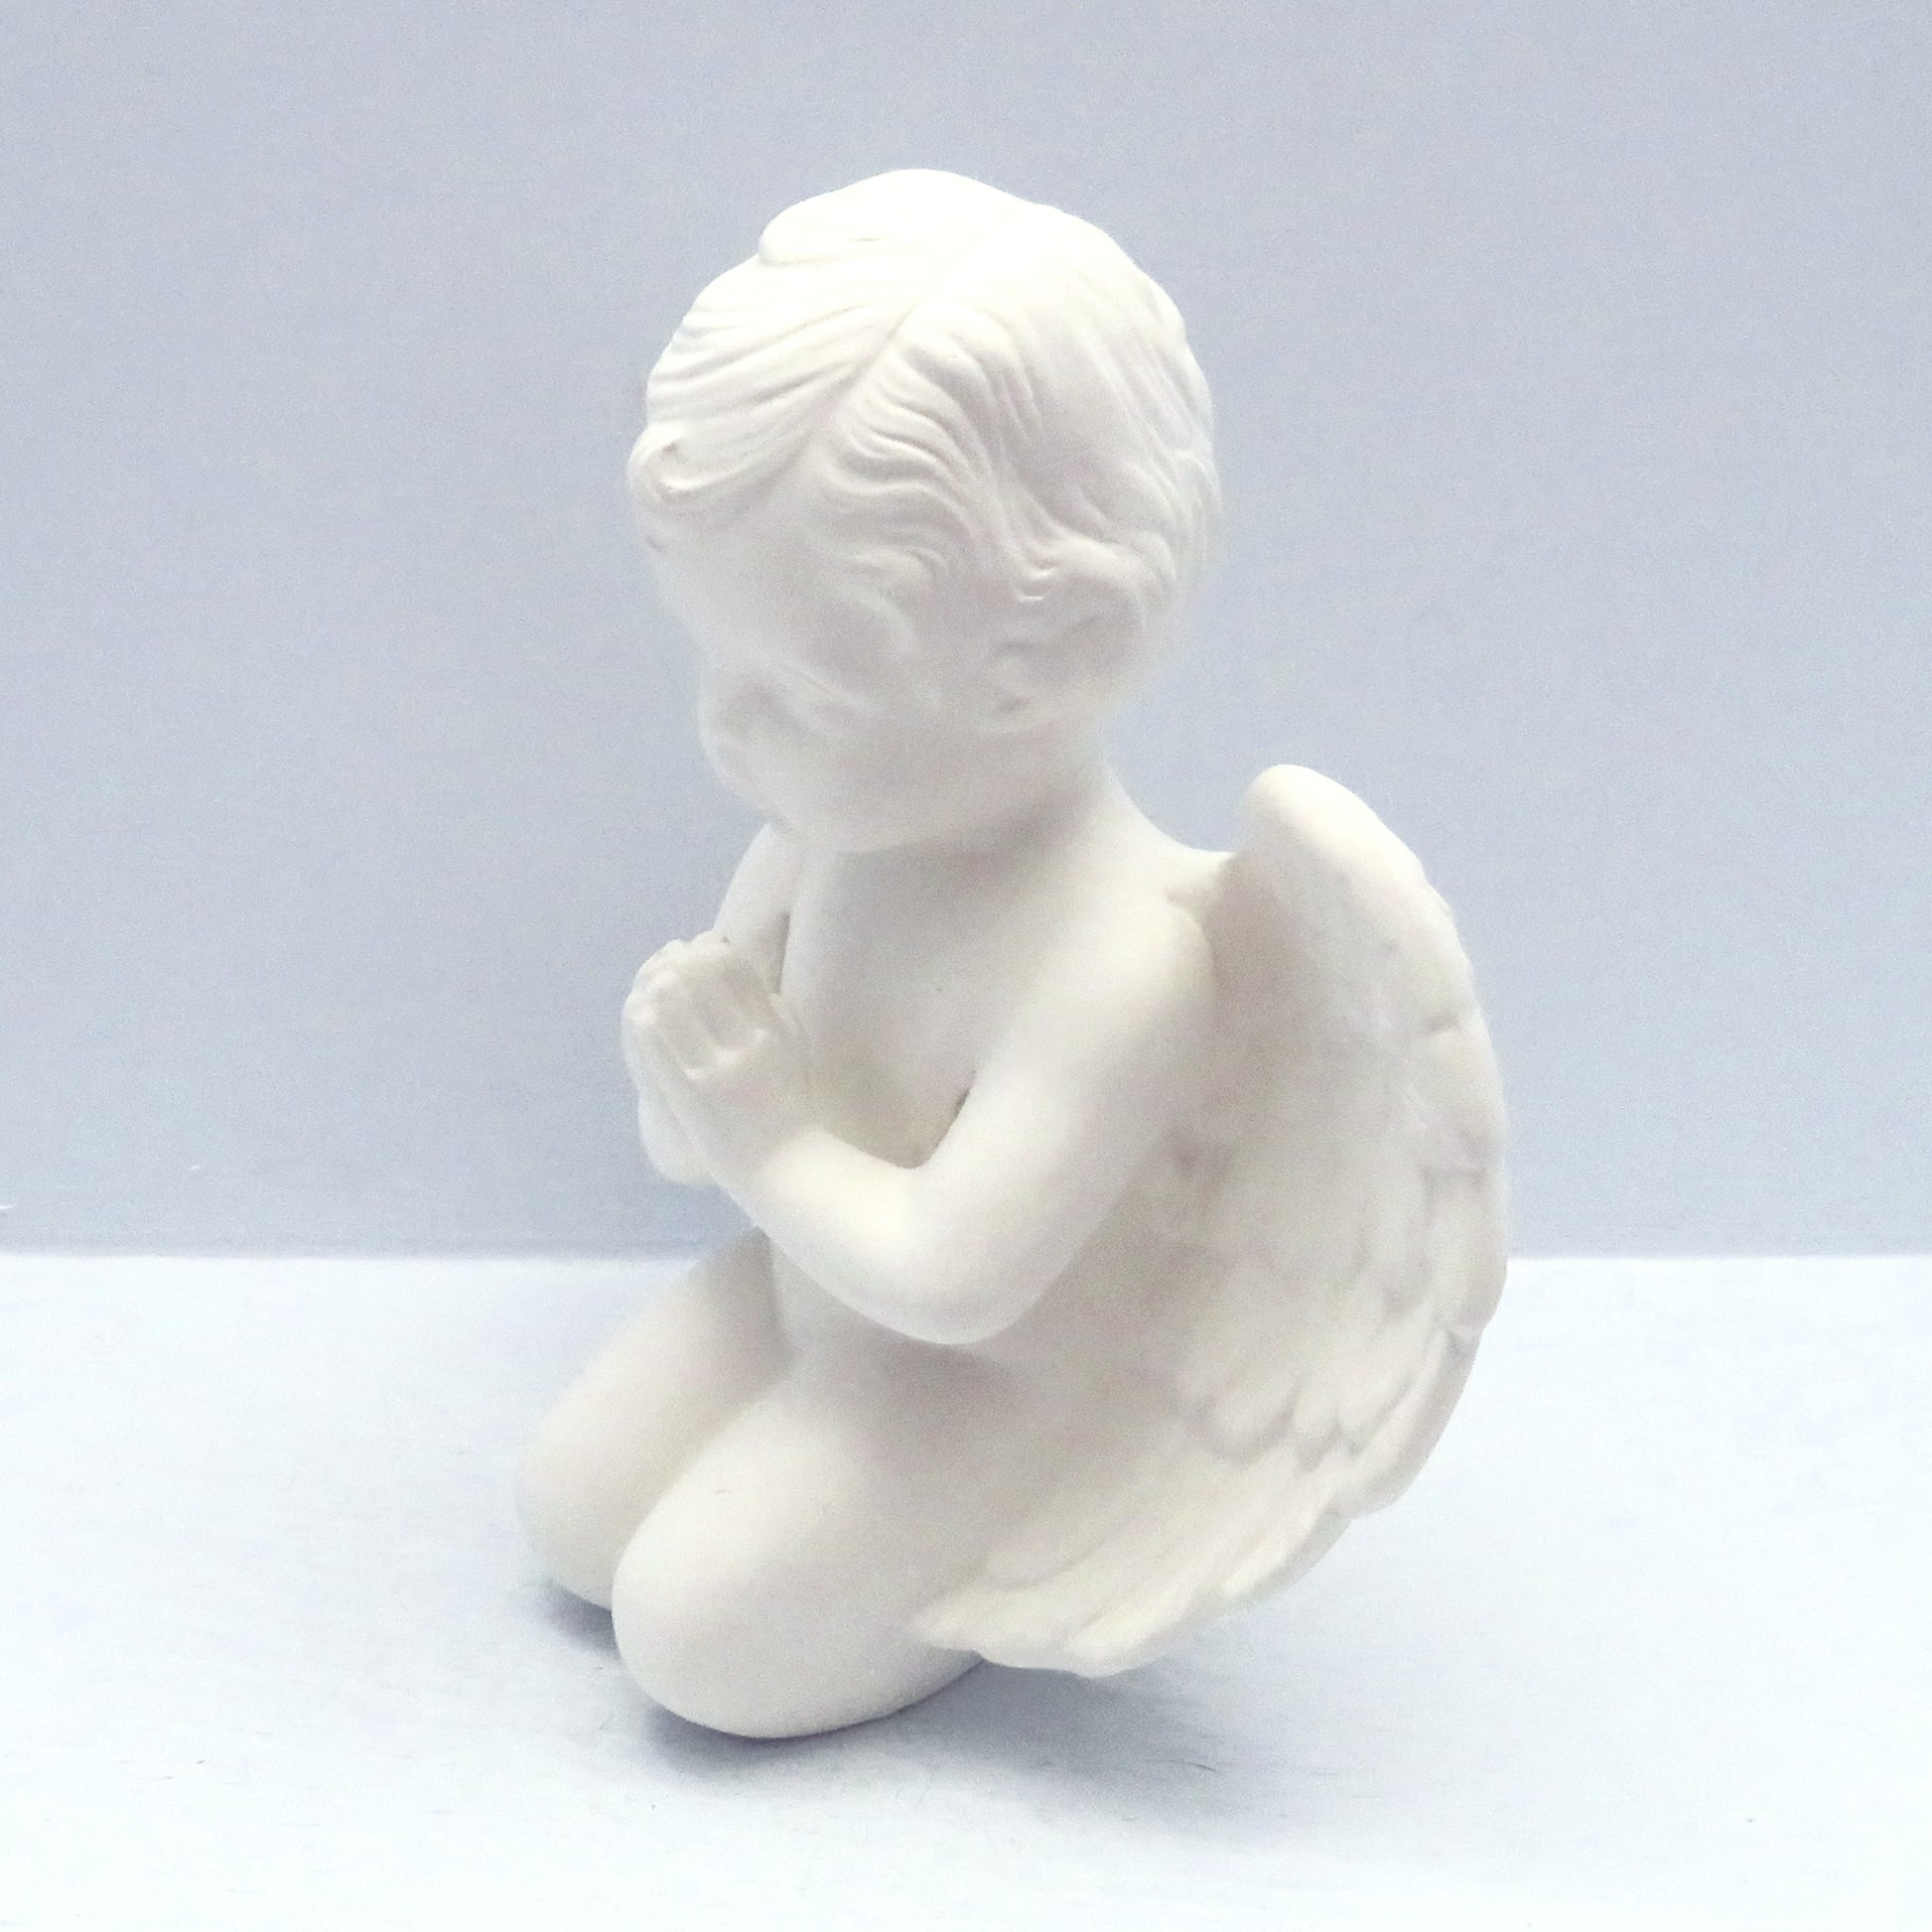 handmade ready to paint kneeling cherub facing left on a pale blue background